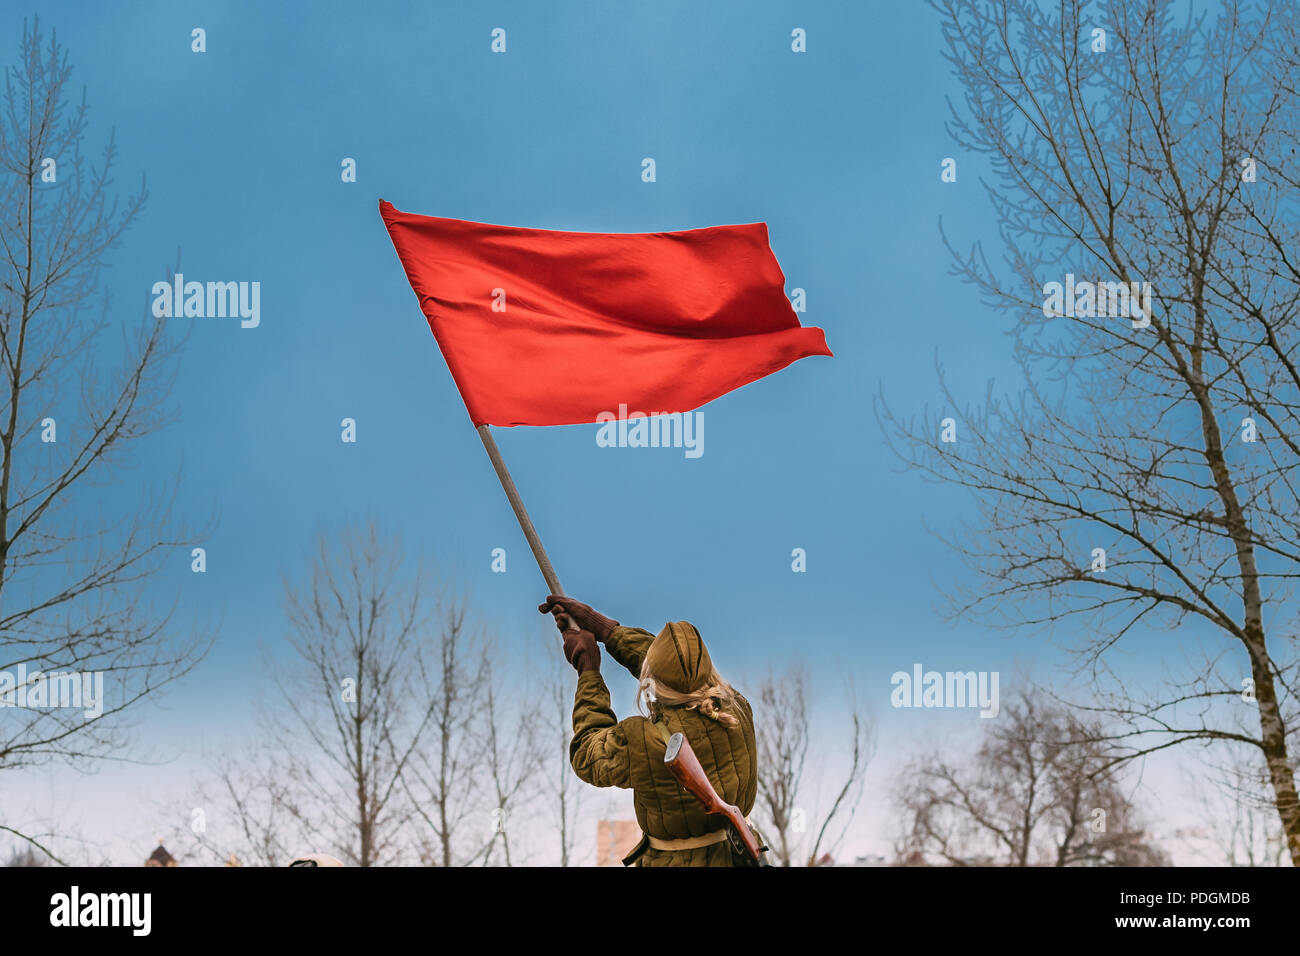 Gomel, Belarus - November 26, 2016: Young Woman Re-enactor Dressed As Russian Soviet Red Army Soldier Of World War II Waving A Red Flag In Honor Of Vi Stock Photo